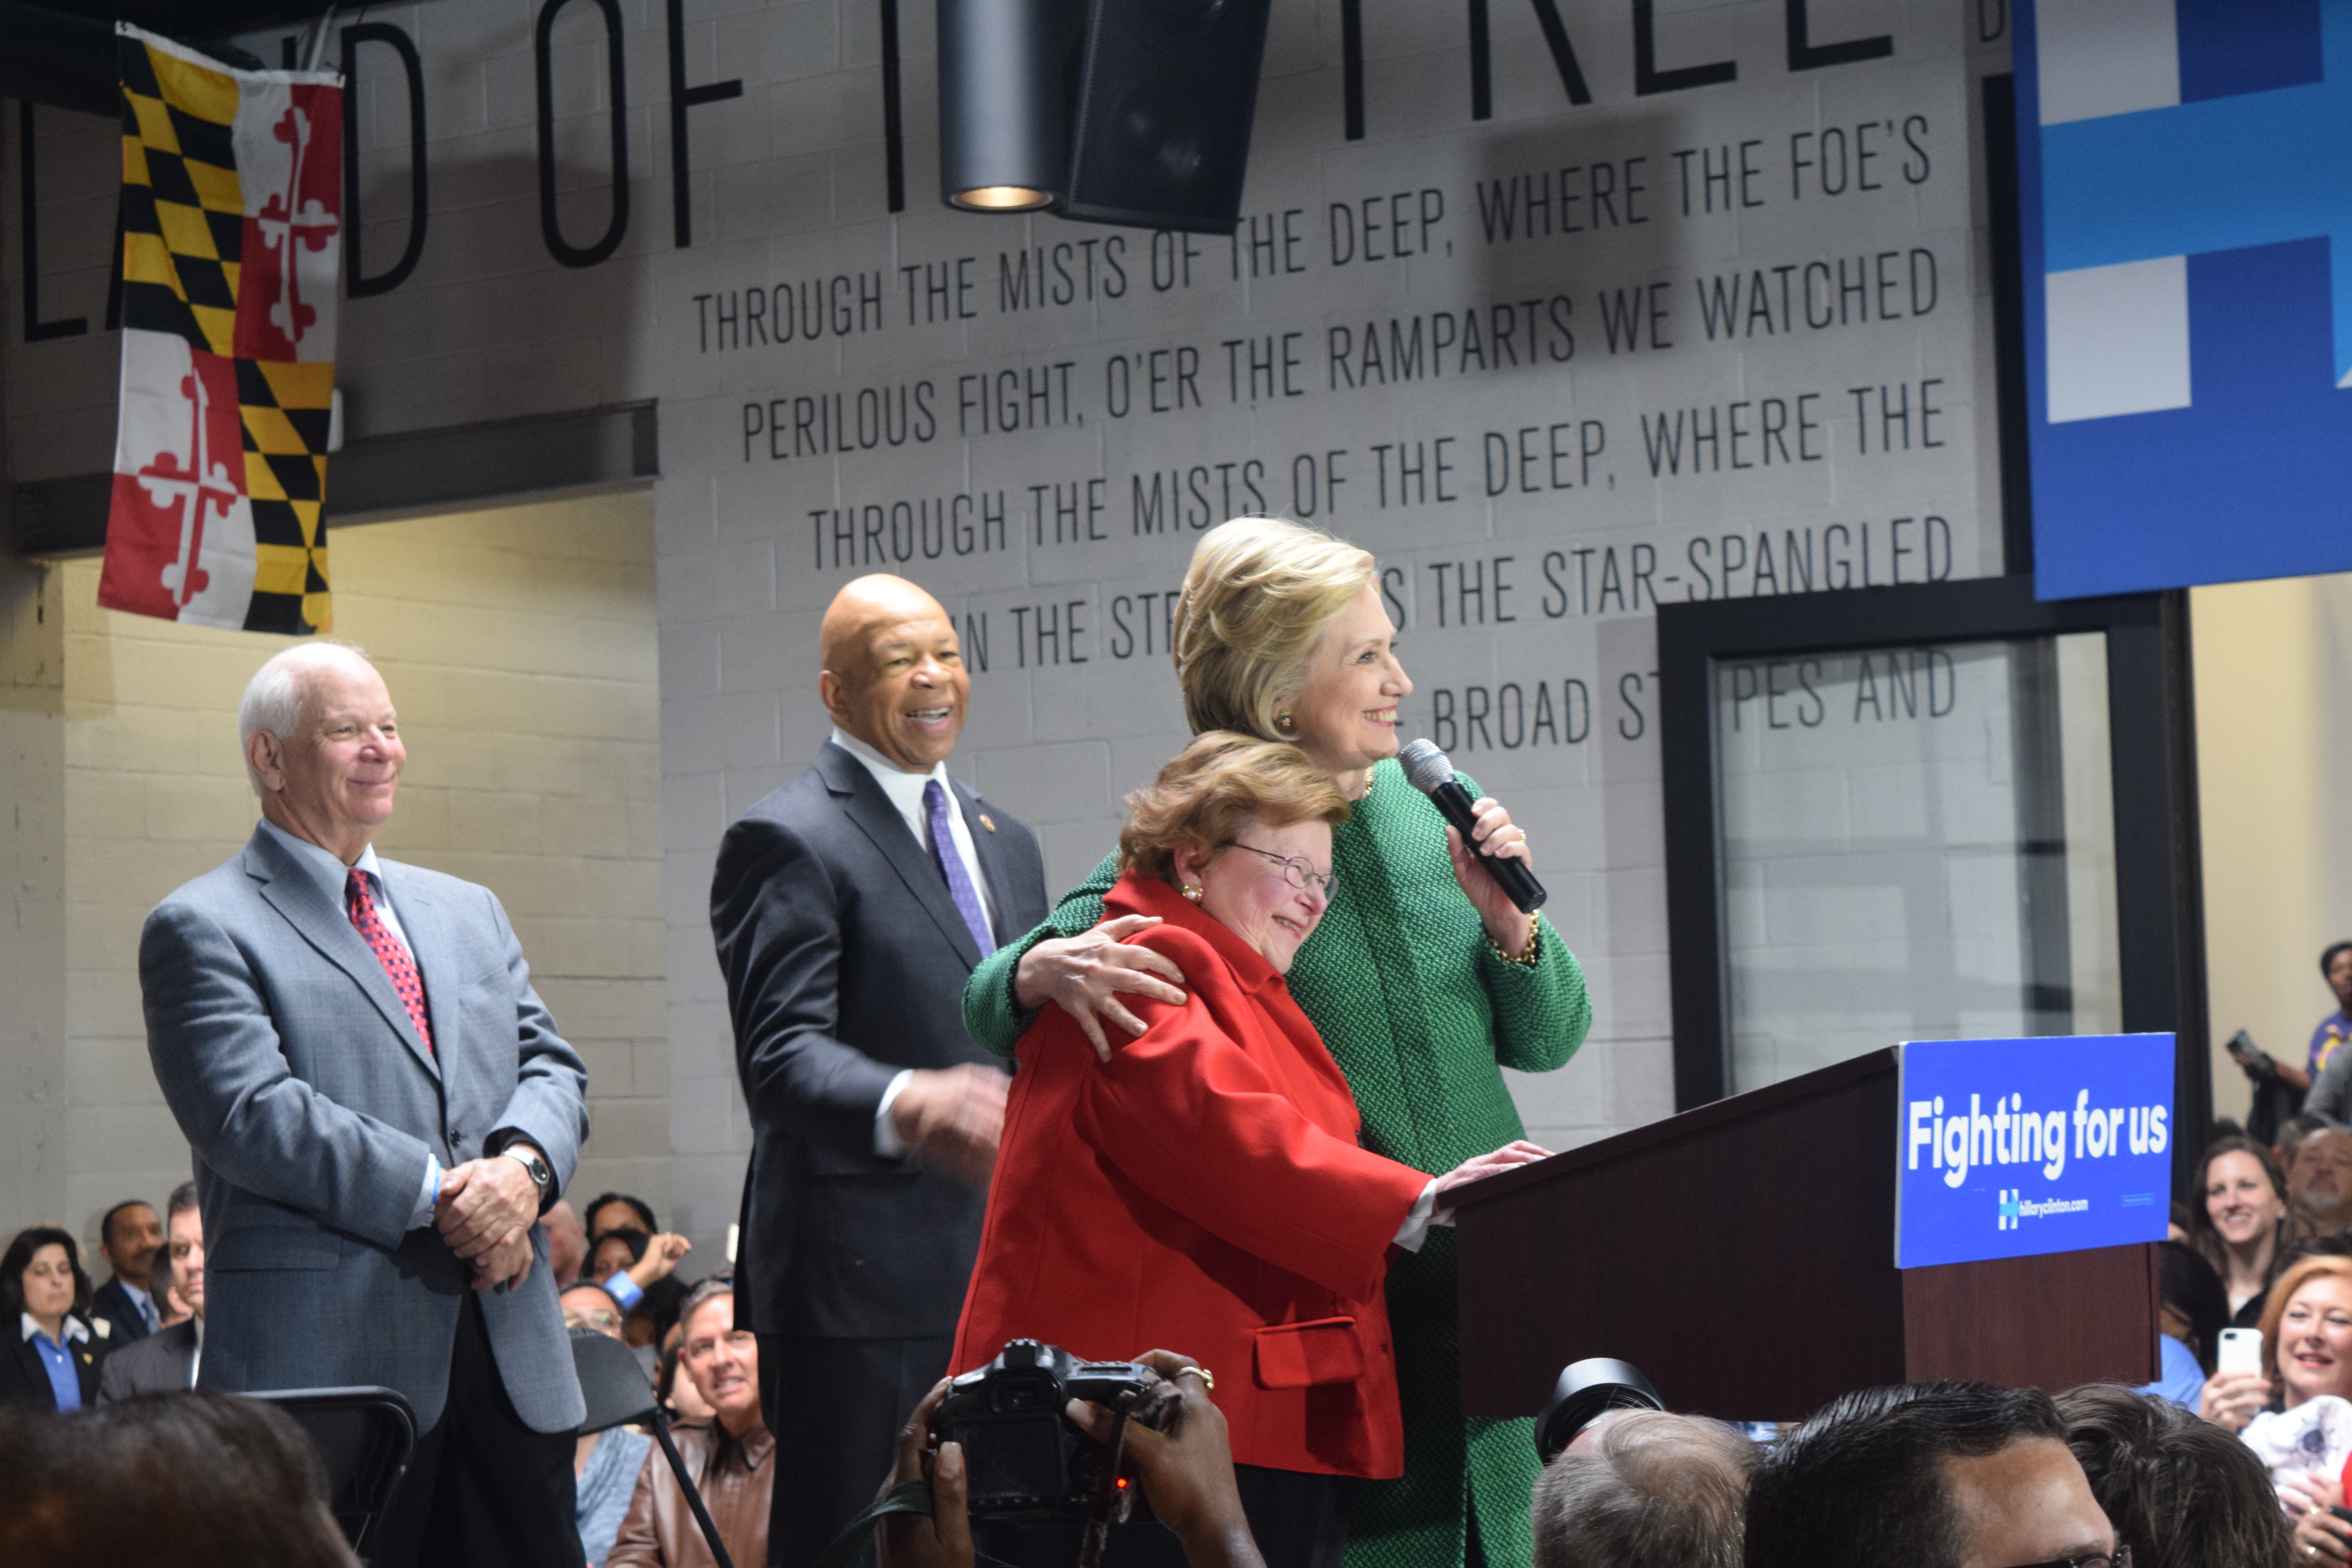 Hillary Clinton addresses a crowd of supporters in Baltimore Sunday. (Capital News Service photo by Alexandra Pamias)